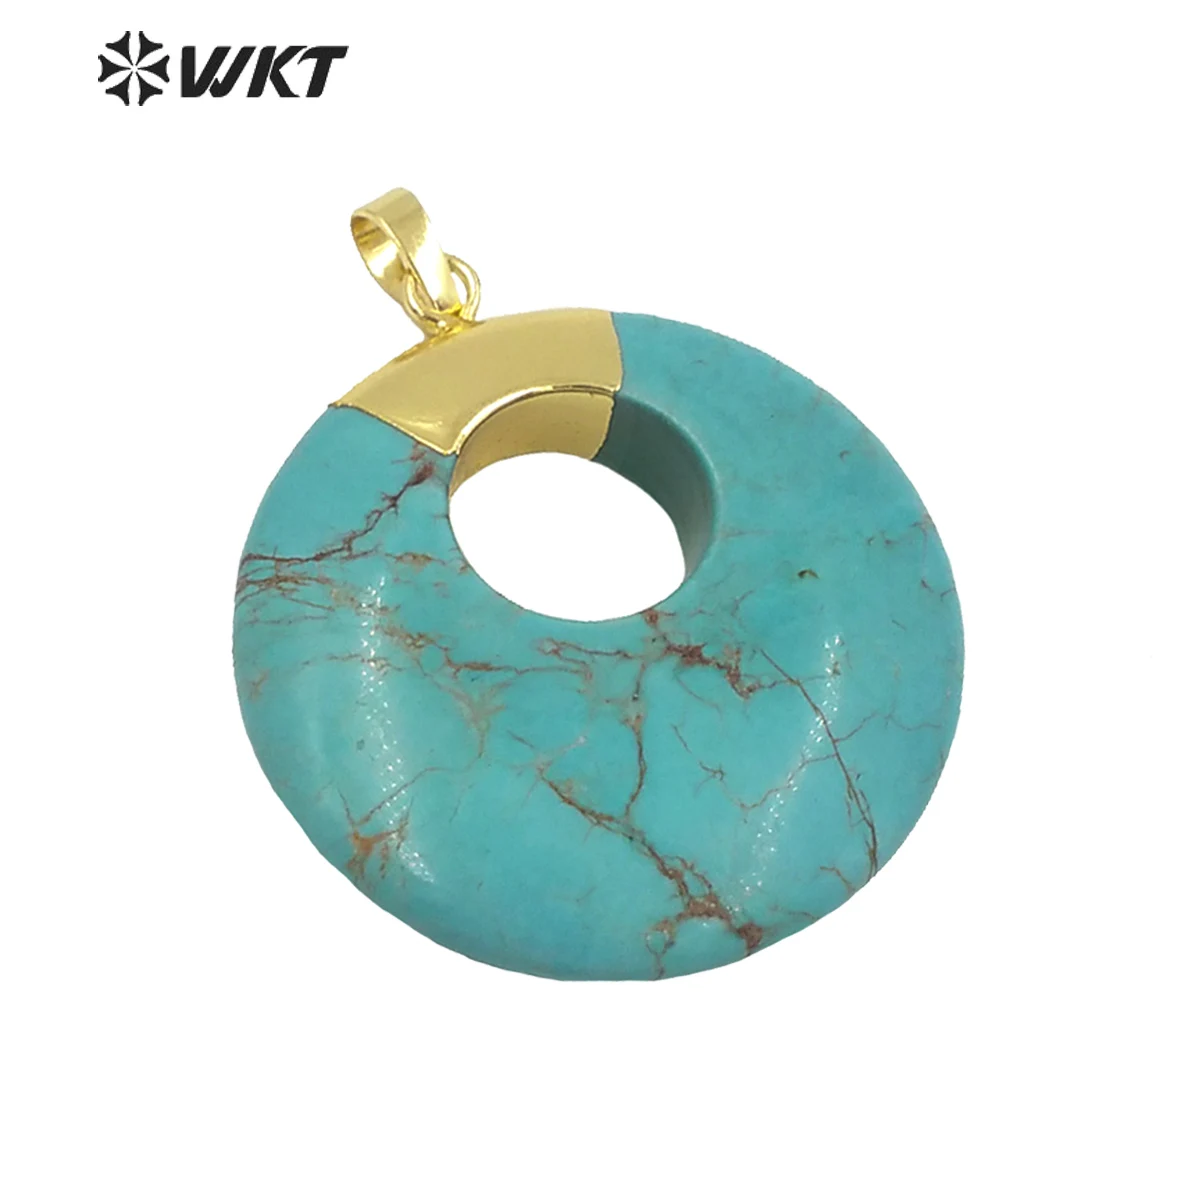 

WT-P1374 Wholesale Custom Lovely Natural Howlite Round Pendant With Gold Trim Big Pendant Randomly Stone For Fashion Jewelry